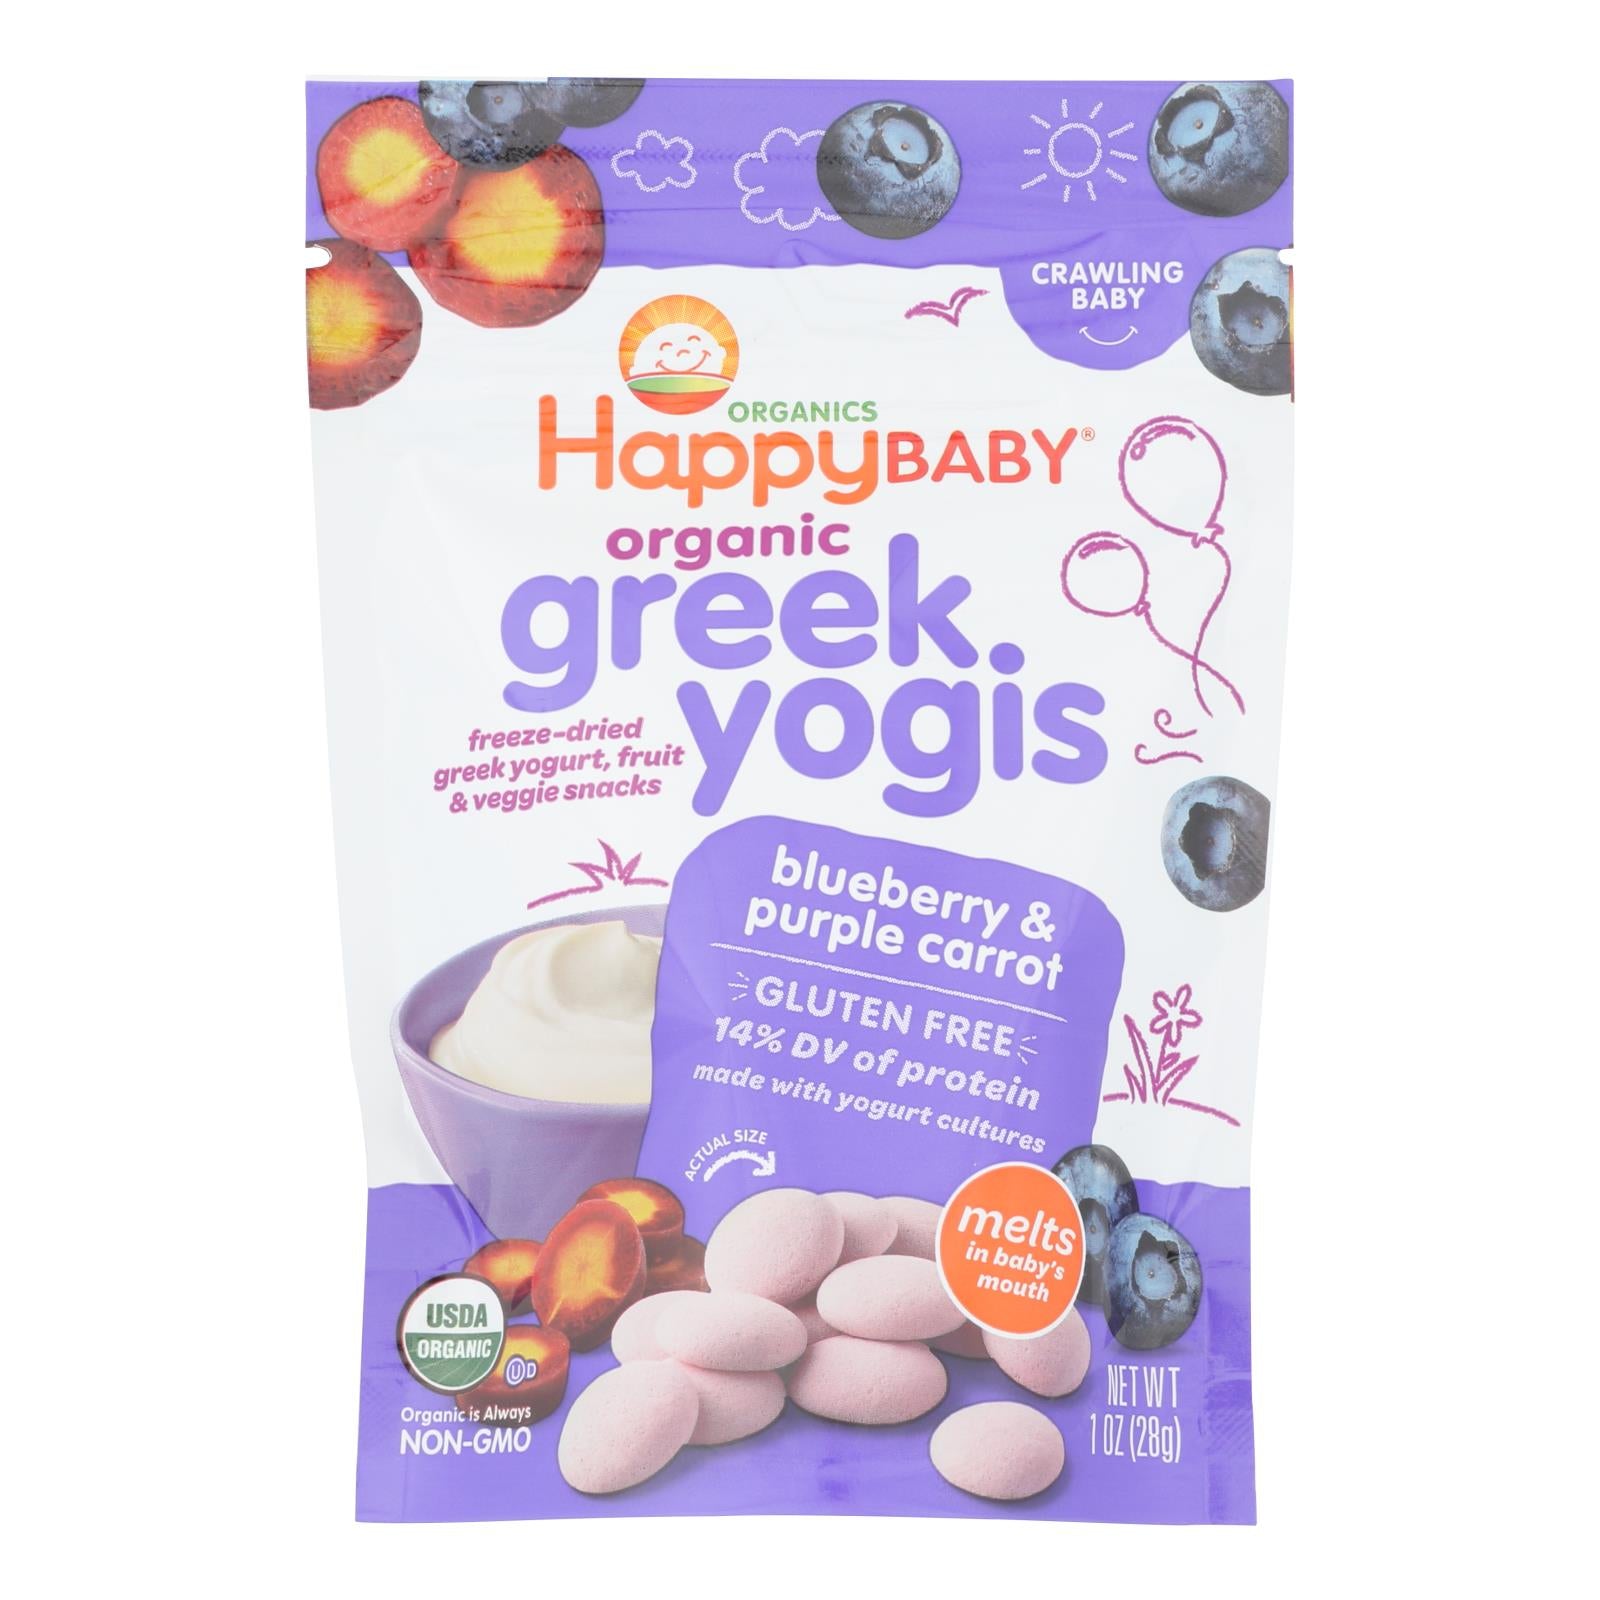 Happyyogis Yogurt Snacks - Organic - Freeze-dried - Greek - Babies And Toddlers - Blueberry And Purple Carrot - 1 Oz - Case Of 8 - Whole Green Foods